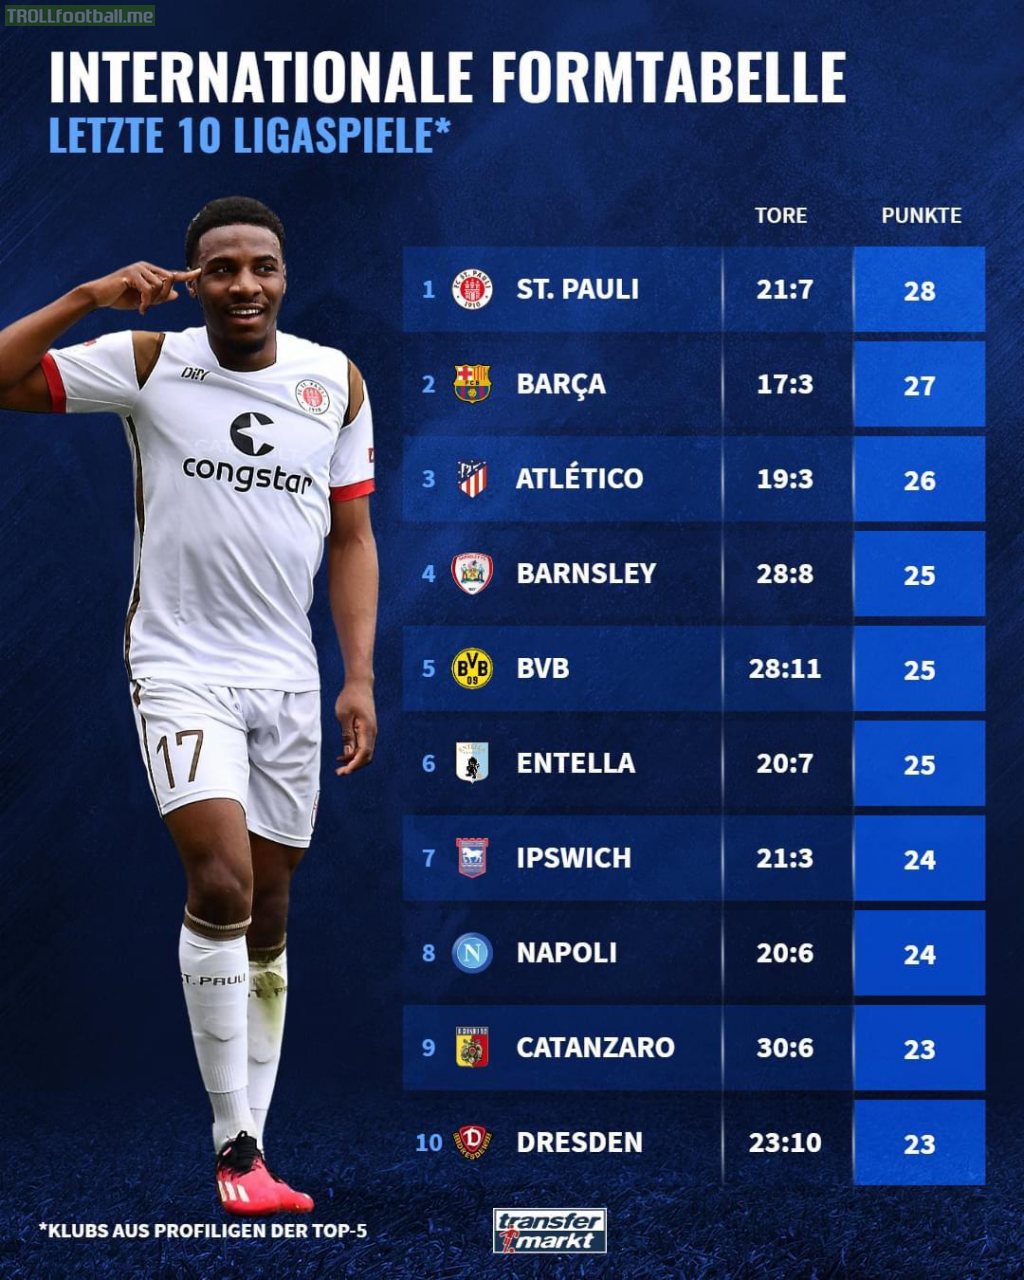 Top 10 most in-form professional teams in Europe’s top 5 countries